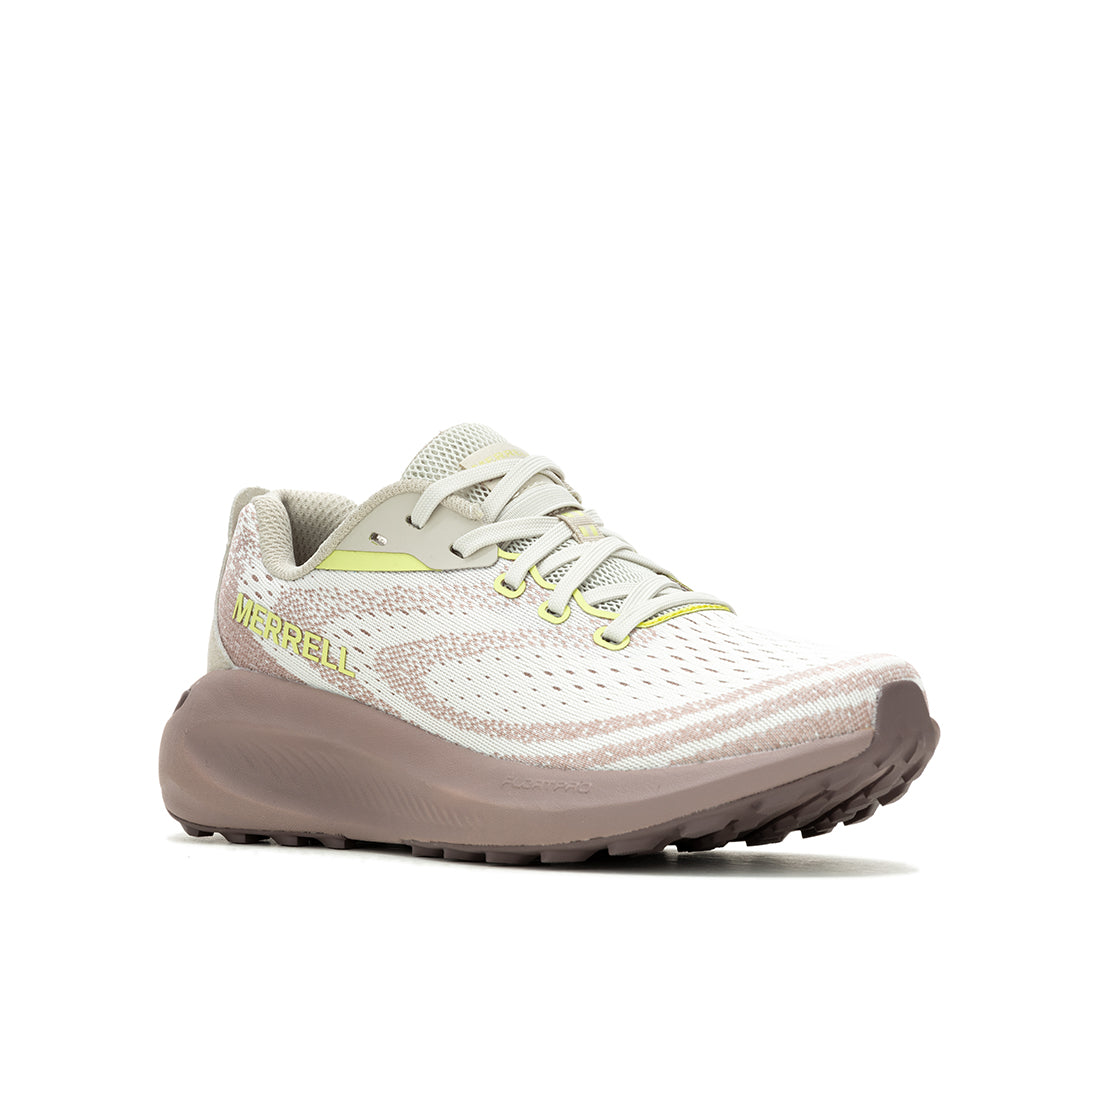 Morphlite – Parchment/Antler Womens Trail Running Shoes - 0